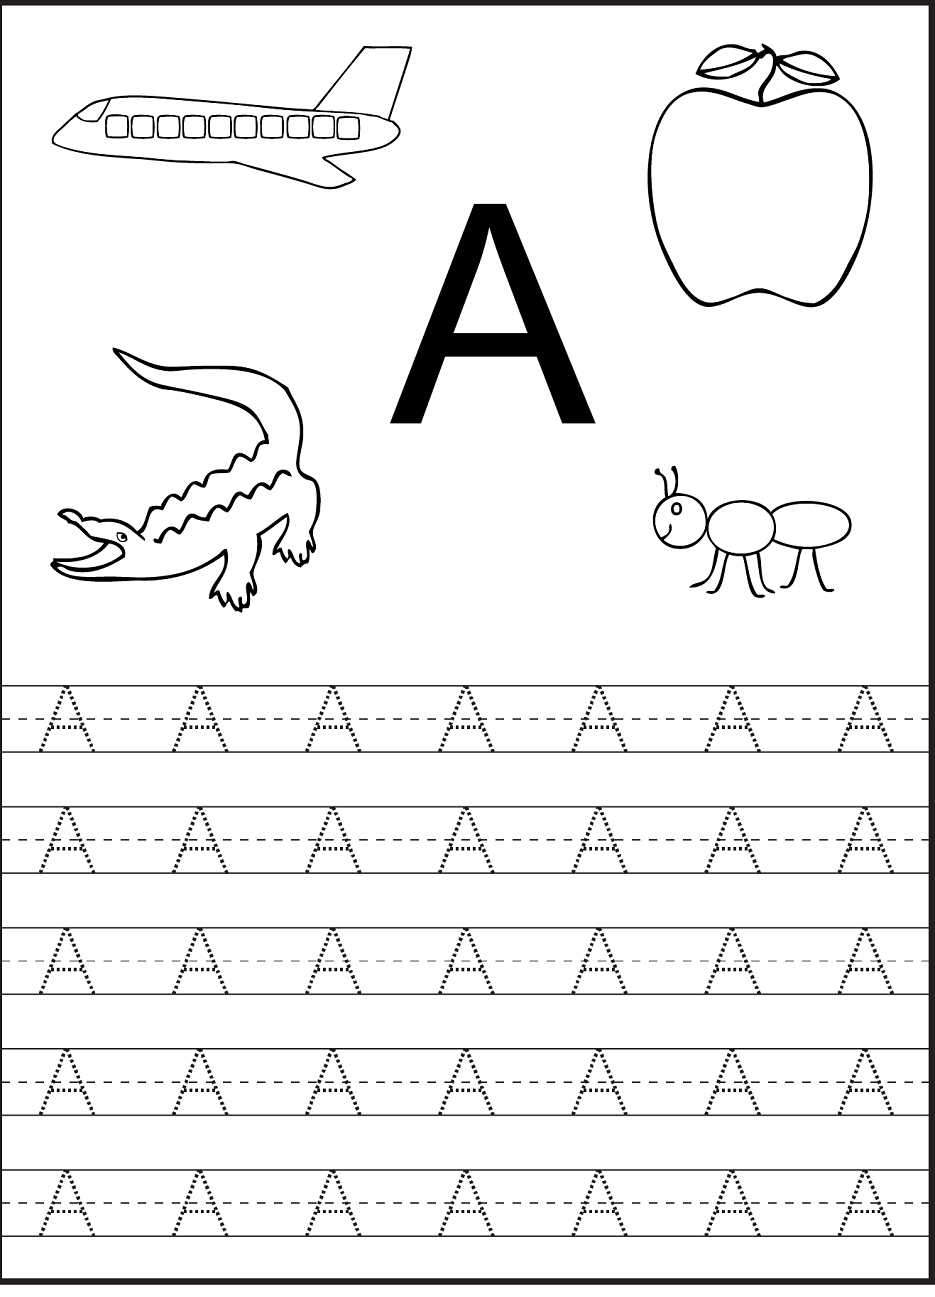 Tracing The Letter A Free Printable | Preschool Worksheets with regard to Tracing Letters Worksheets For Pre-K